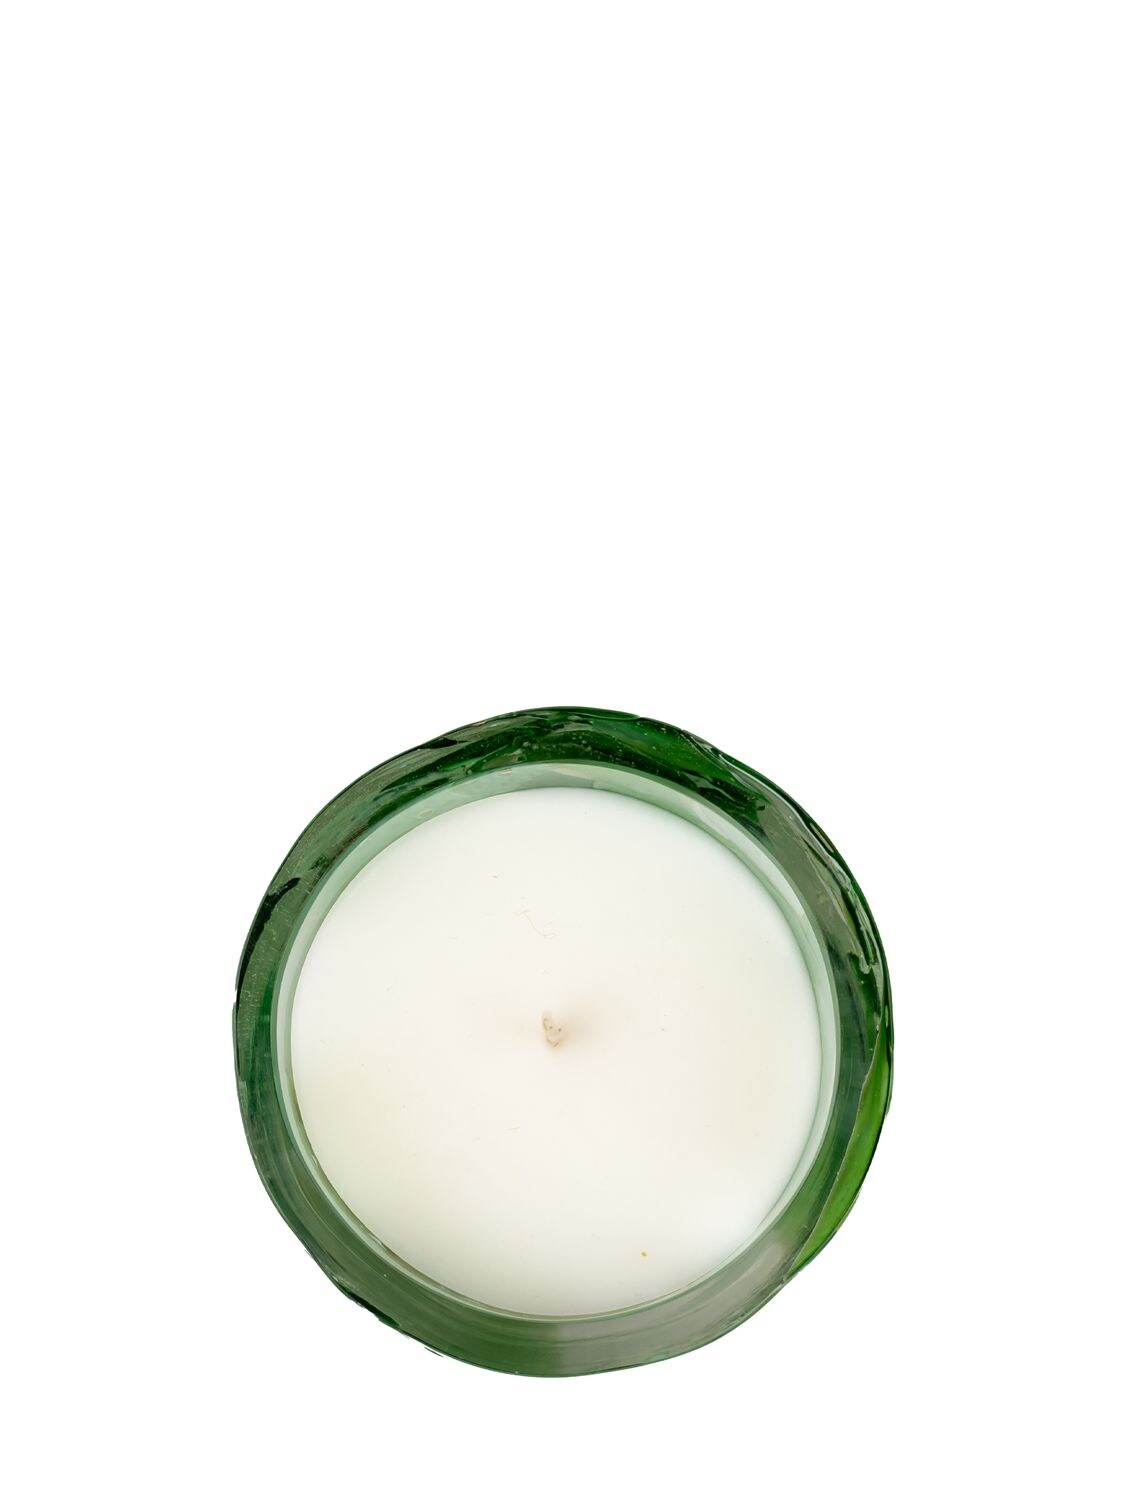 Shop Stories Of Italy Watercolor Jade Scented Candle In Green